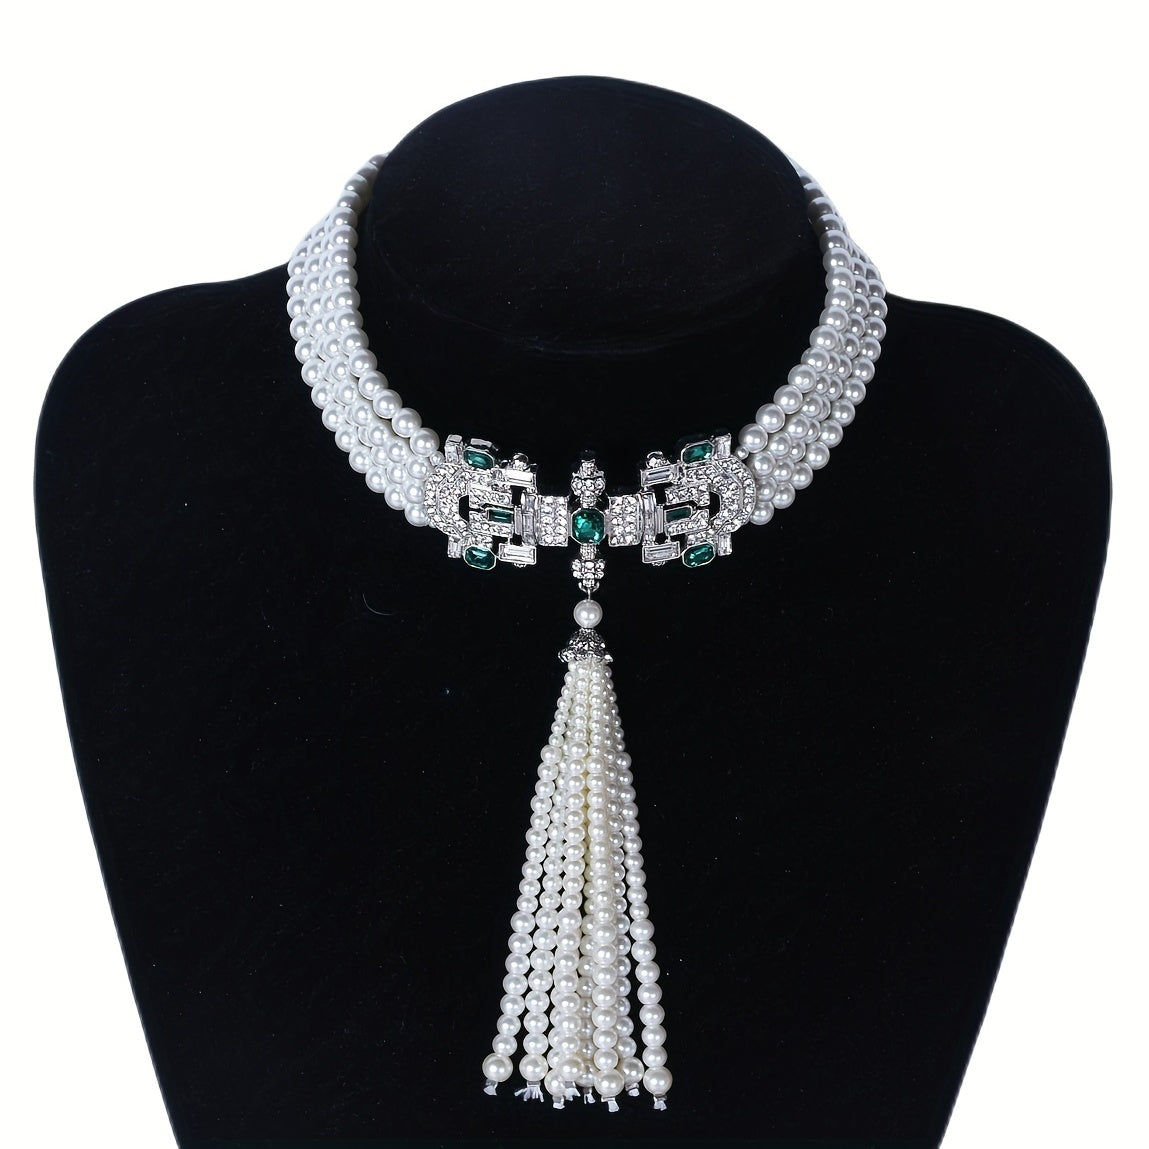 Women's Faux Pearl Chain Tassel Necklace Inlaid Green Crystal Wedding Party Clothing Accessories